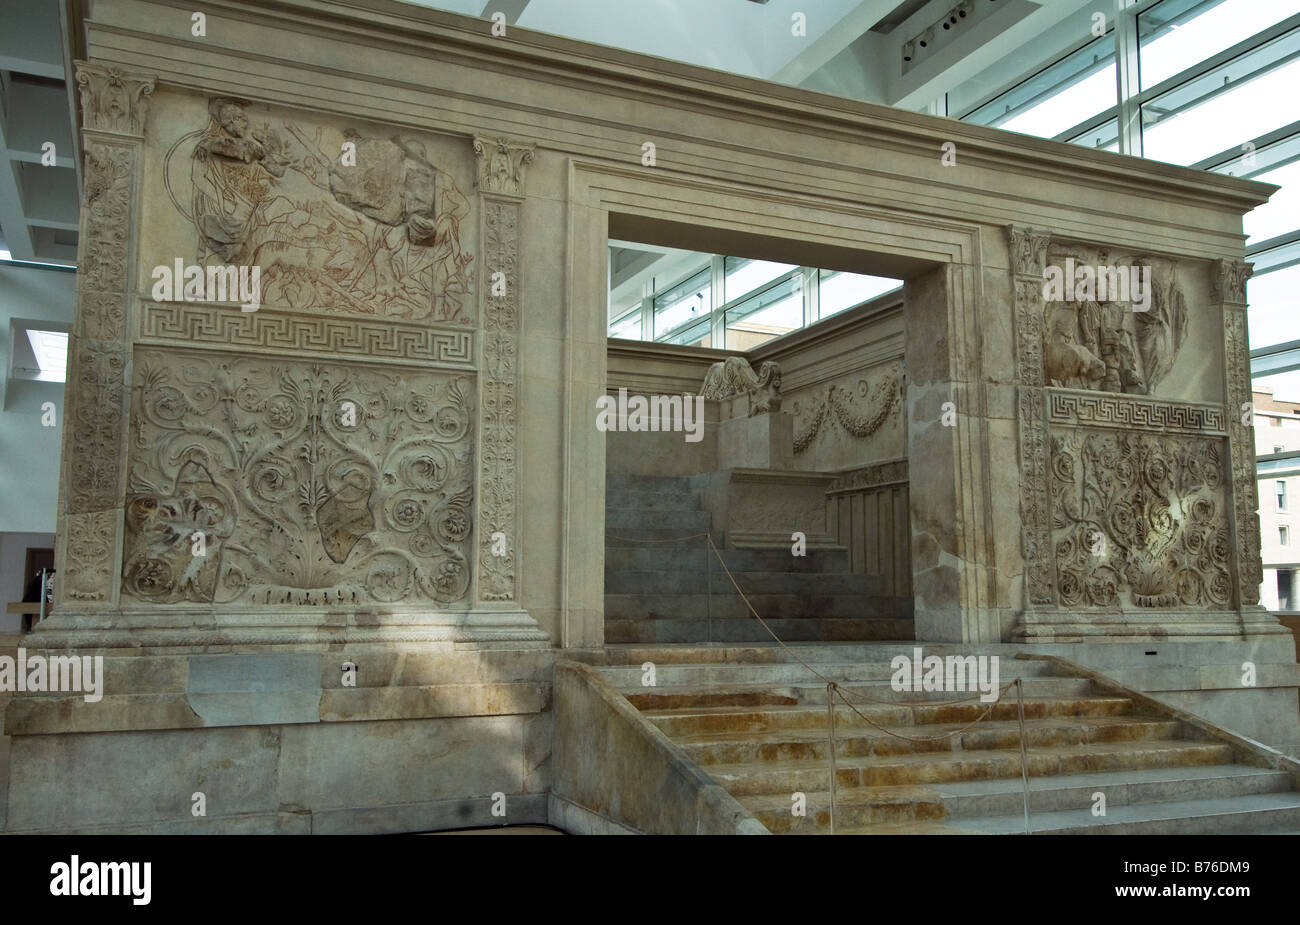 Roman altar of the Ara Pacis in Rome Stock Photo